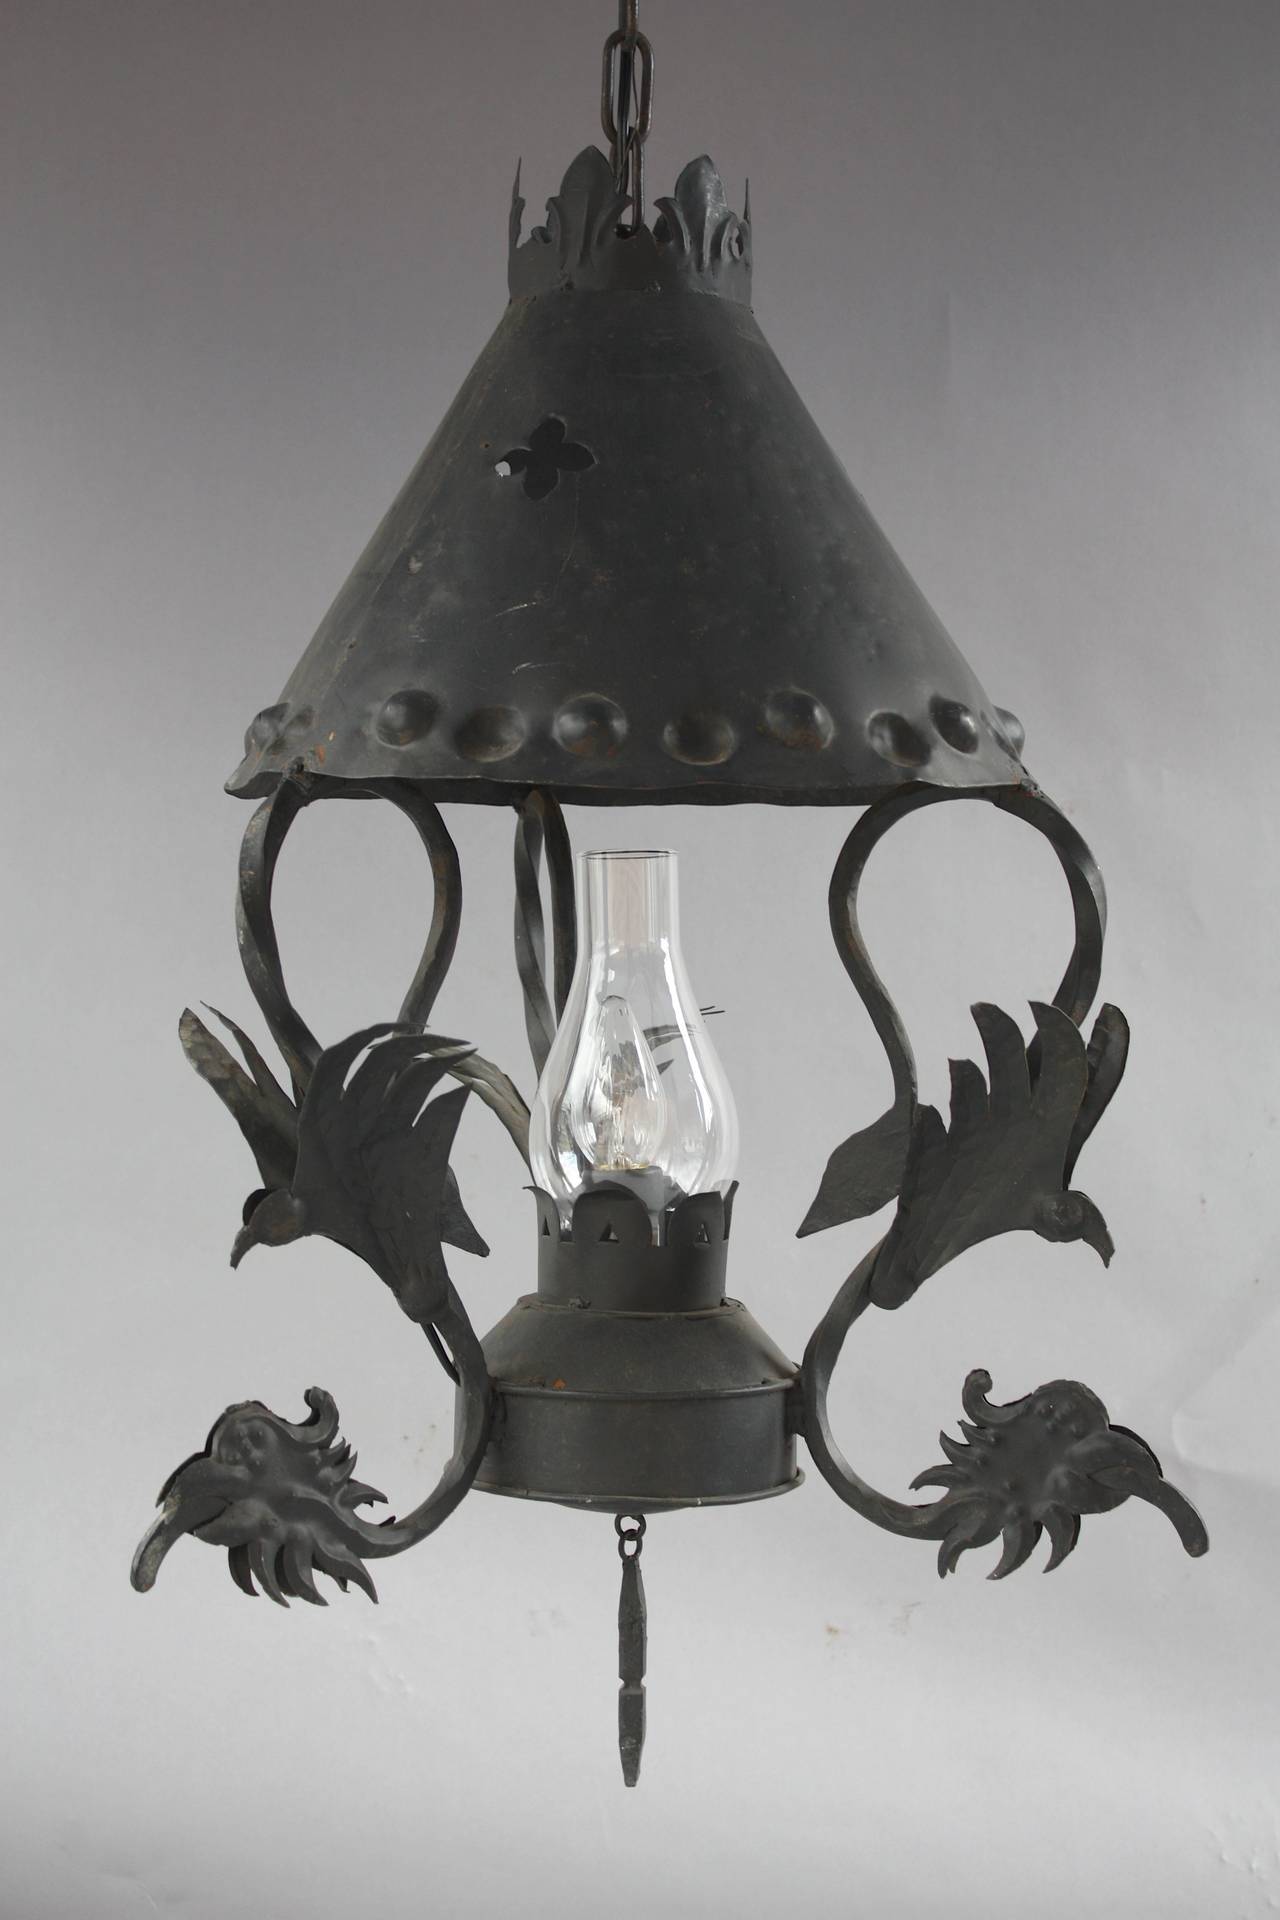 Wrought iron fixture with magnificent iron work, circa 1920s. The body of the fixture is 30.5